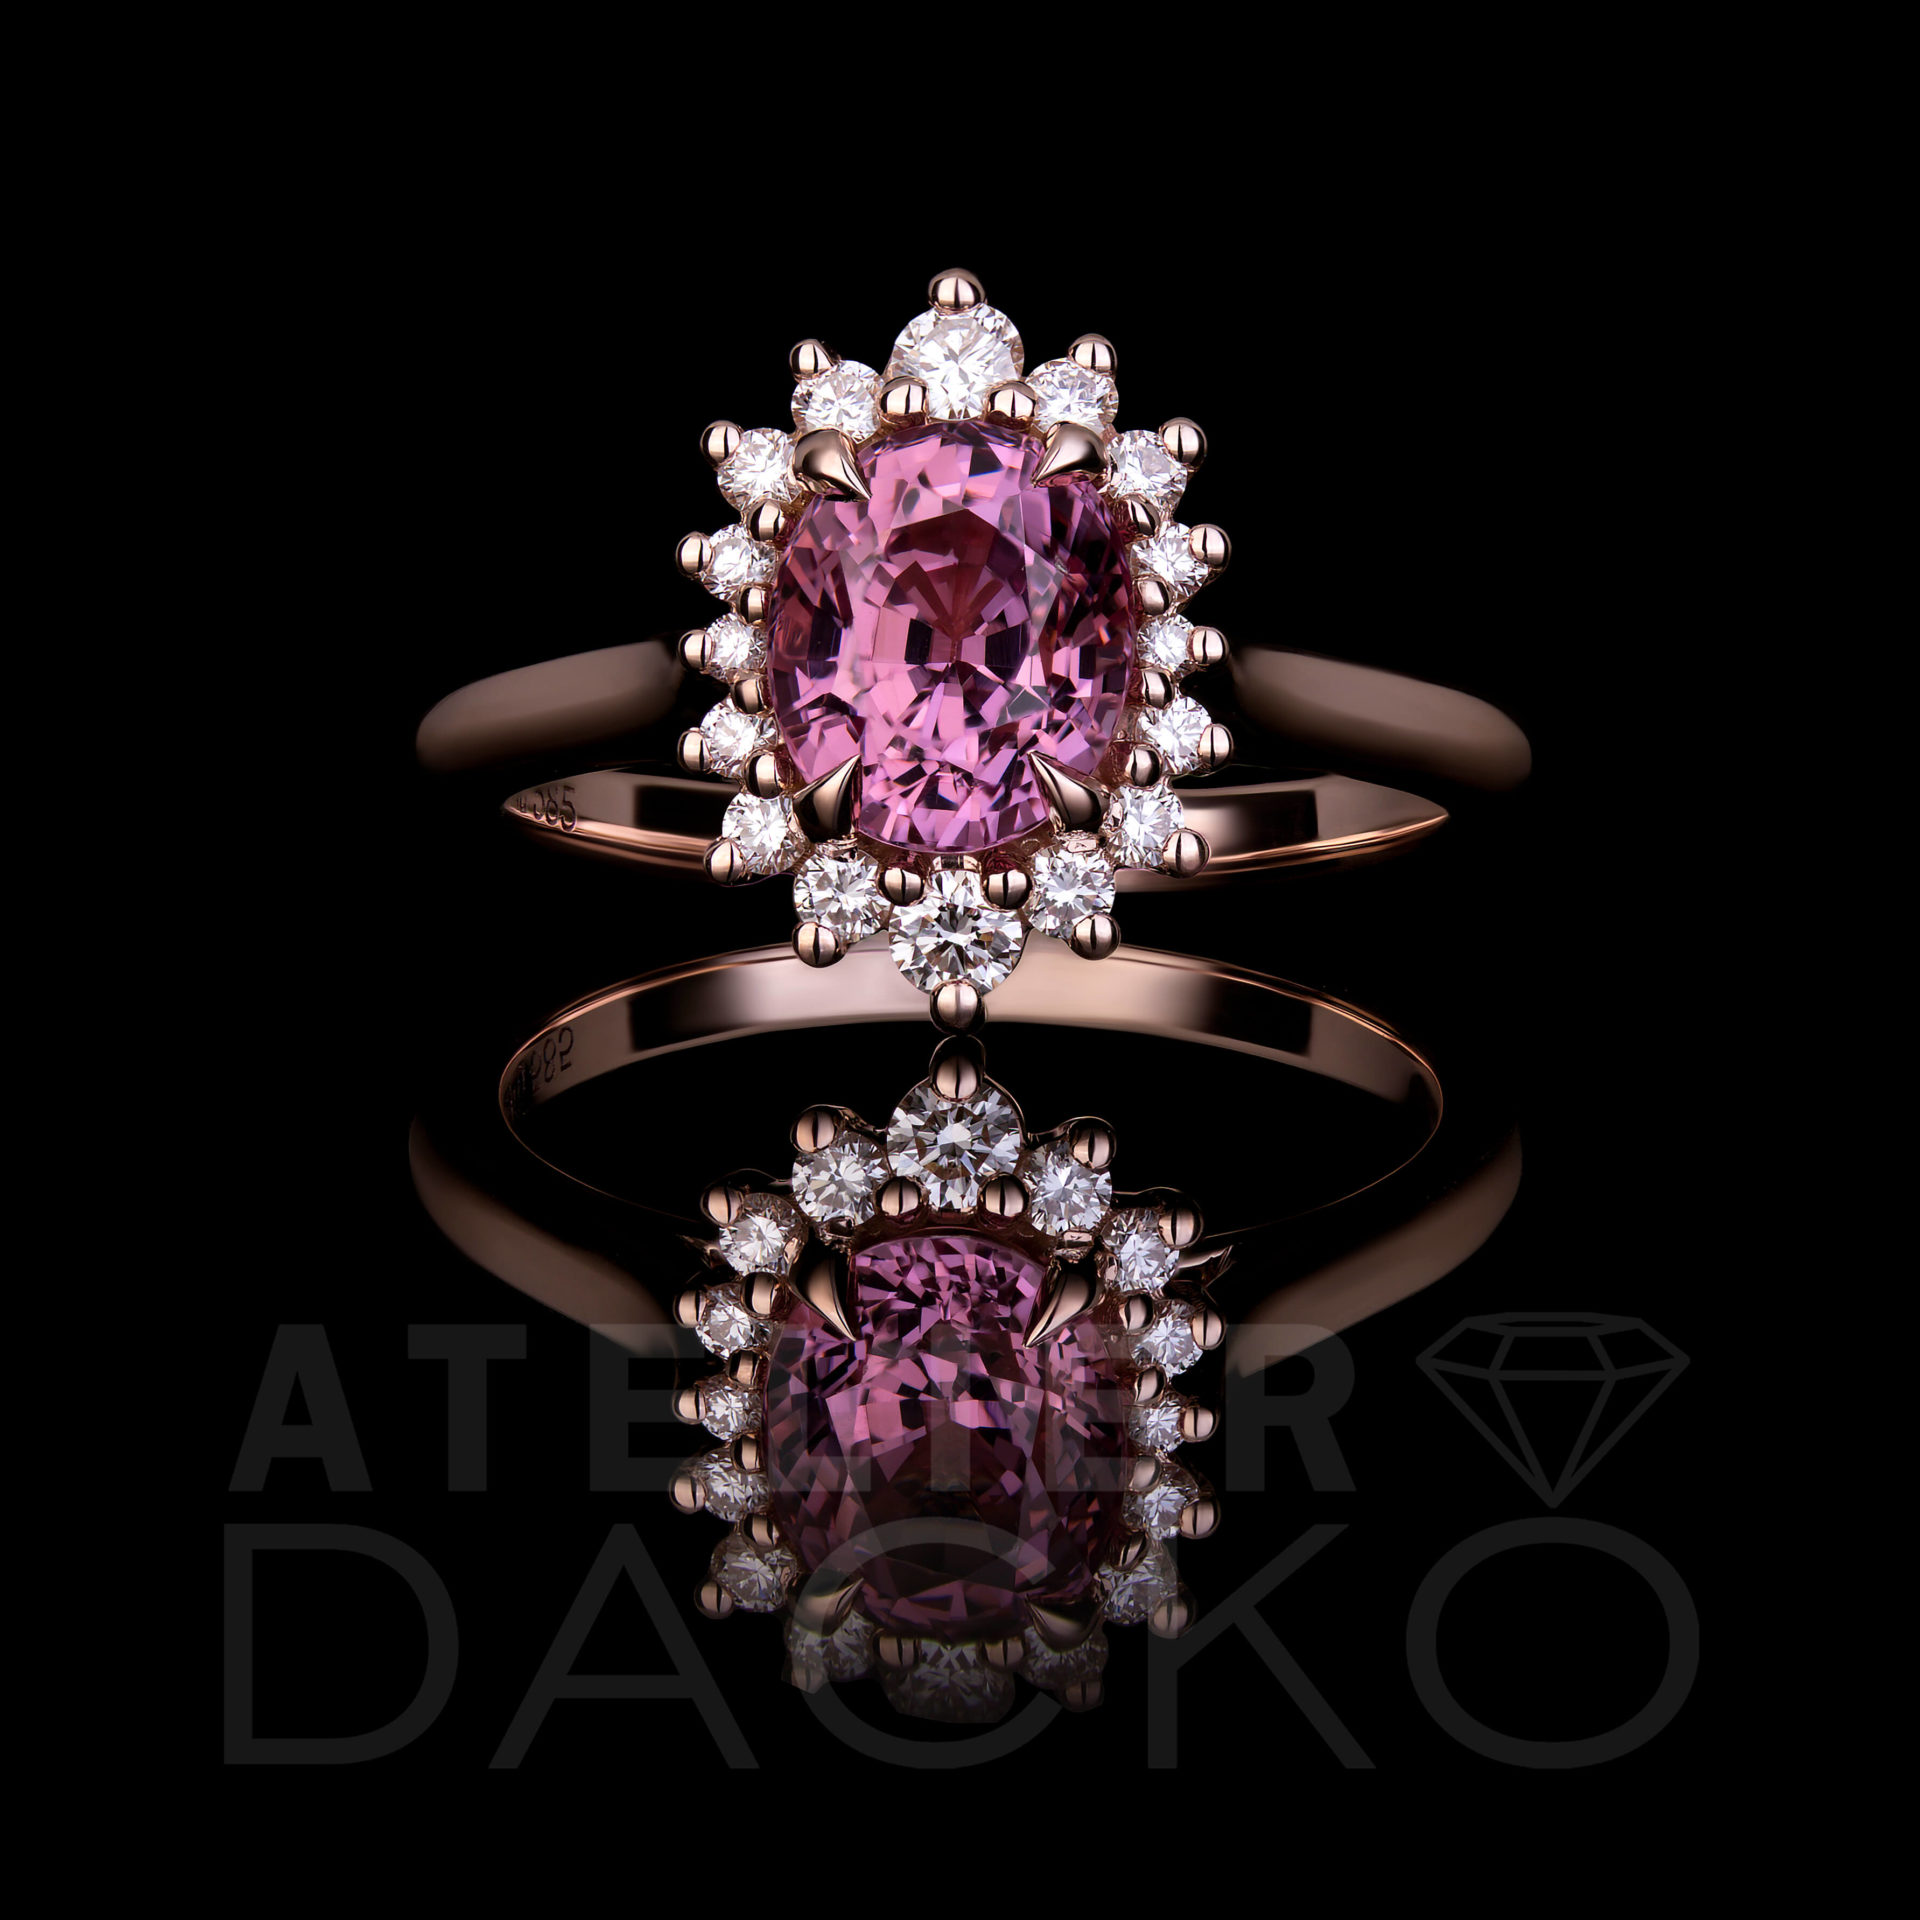 AD055 - 1.43 CT Pink Oval Spinel with Floral Halo Ring - 1